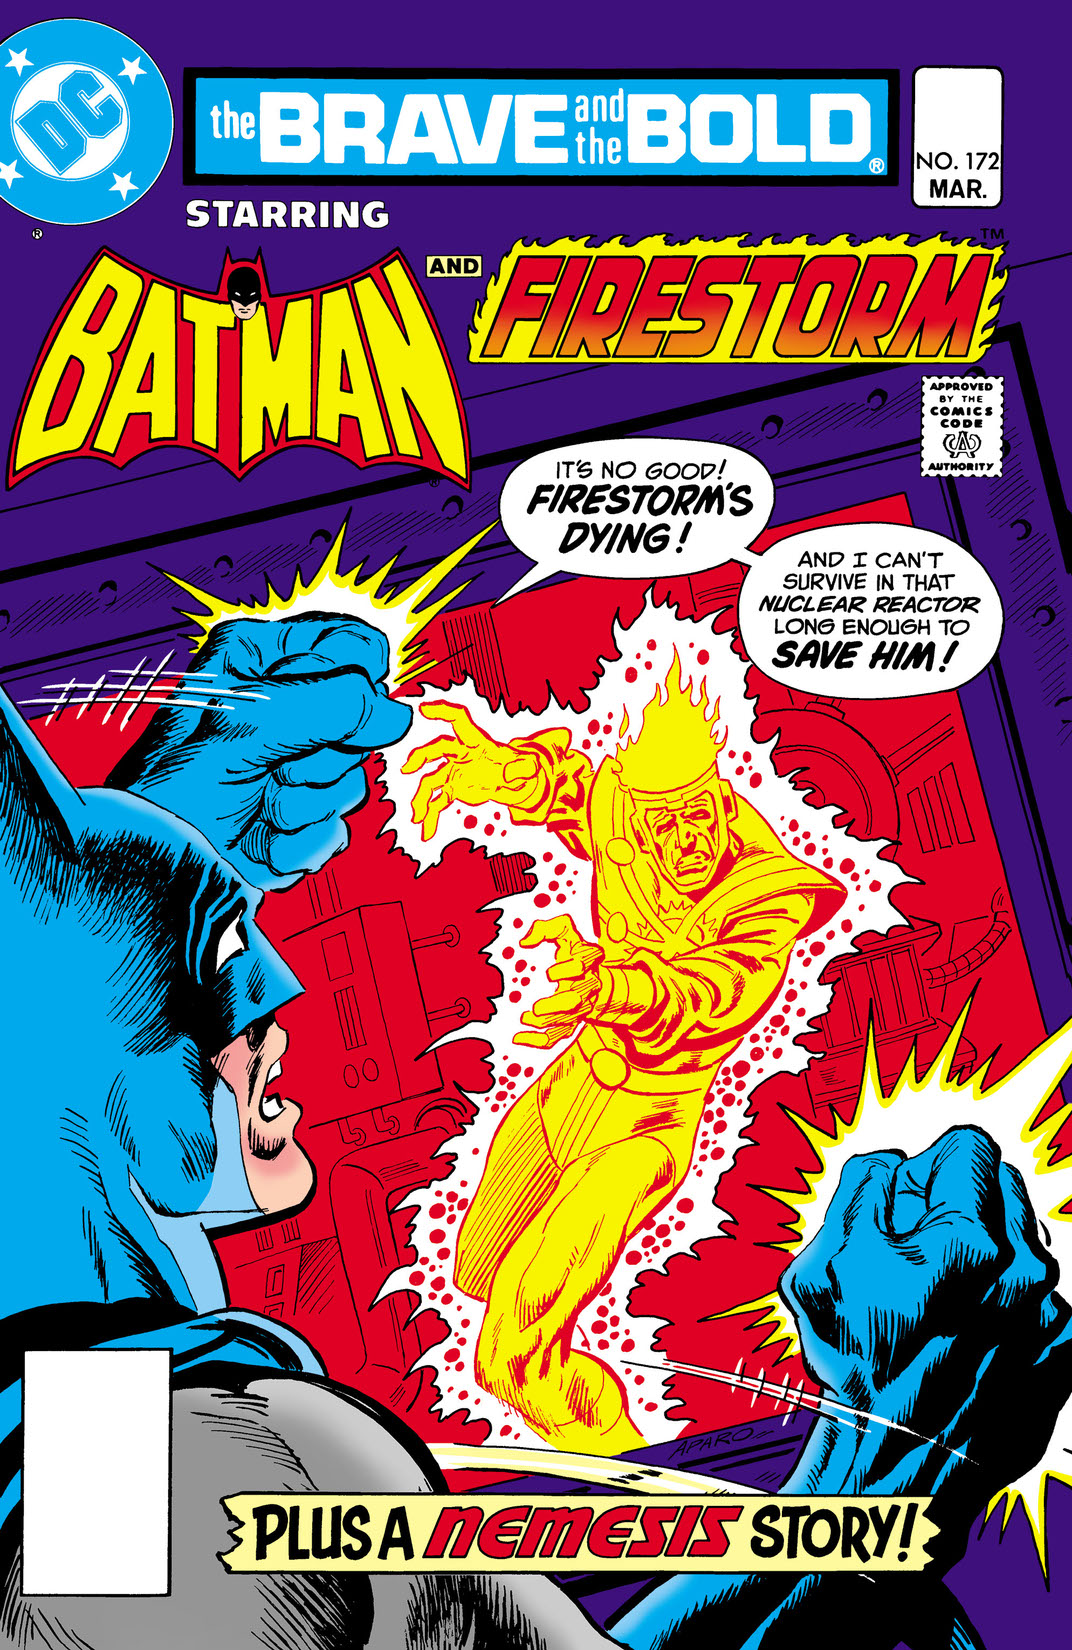 The Brave and the Bold (1955-) #172 preview images